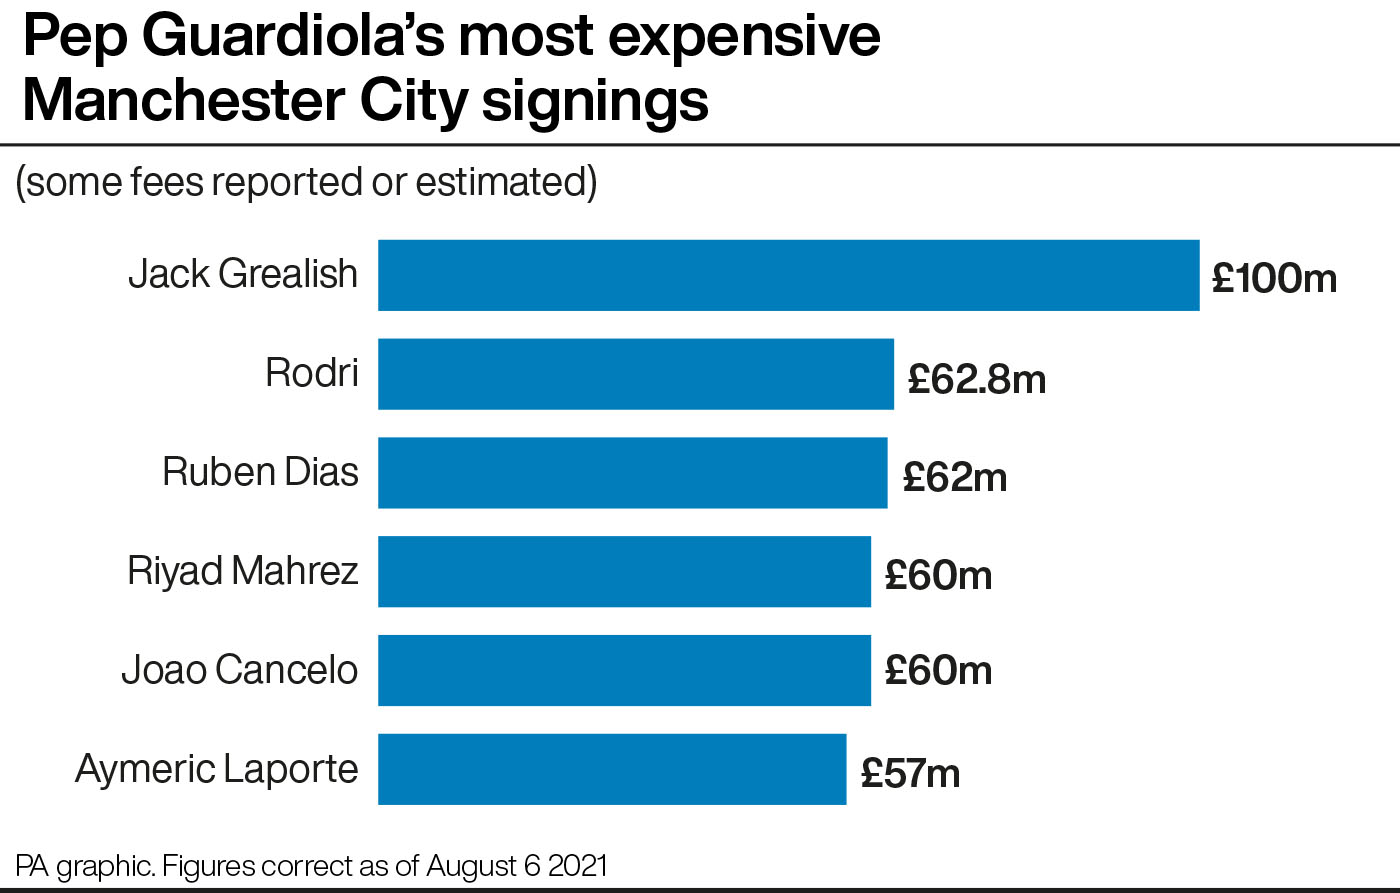 Pep Guardiola's most expensive Manchester City signings